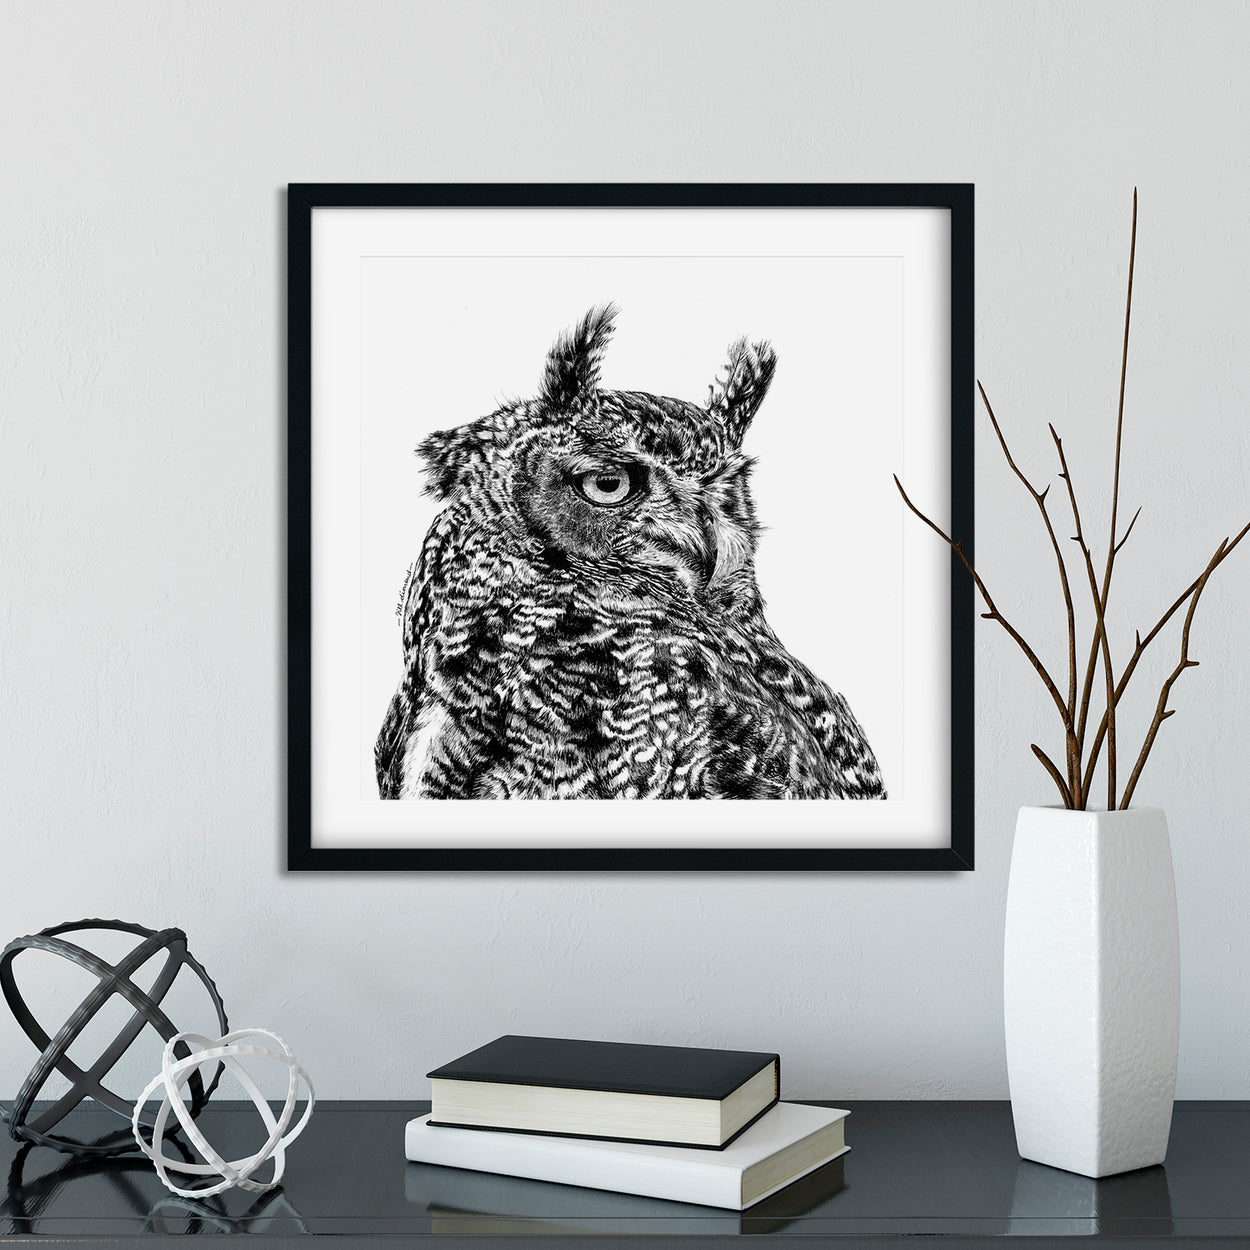 Eagle Owl Prints Square Framed - The Thriving Wild